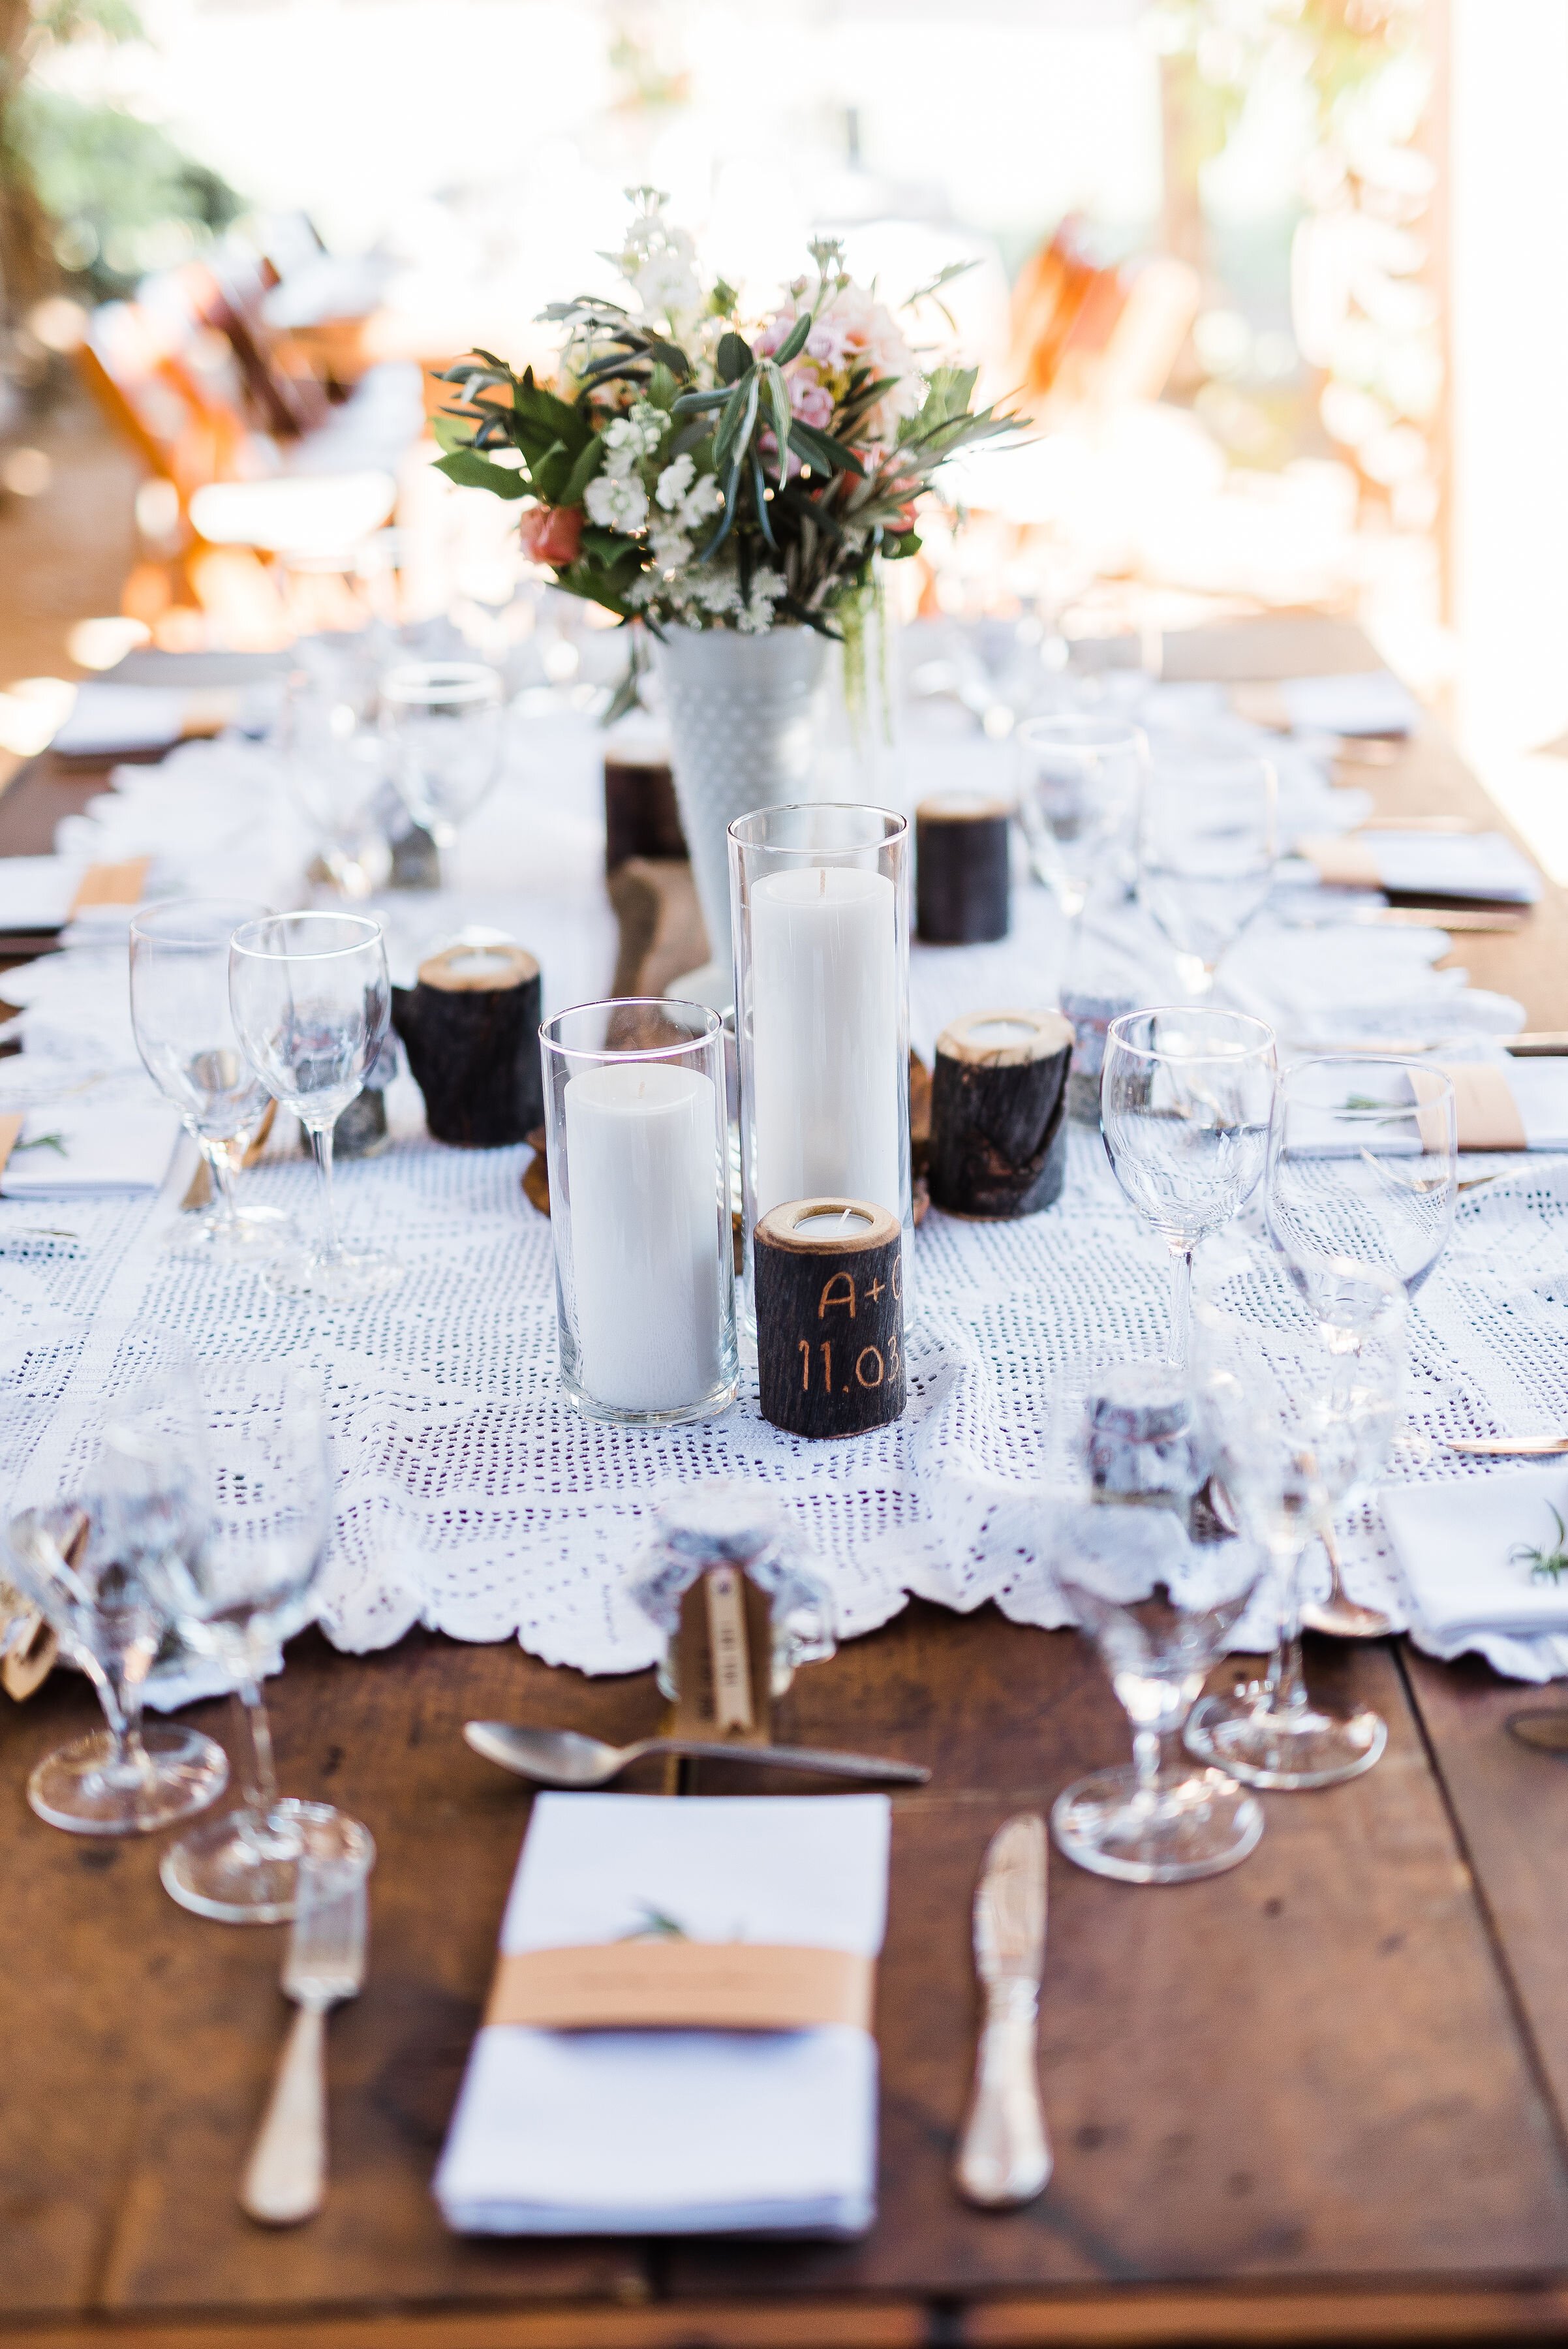 www.santabarbarawedding.com | Roblar Winery and Farm | Brittany Taylor Photography | Reception Tables with Candles